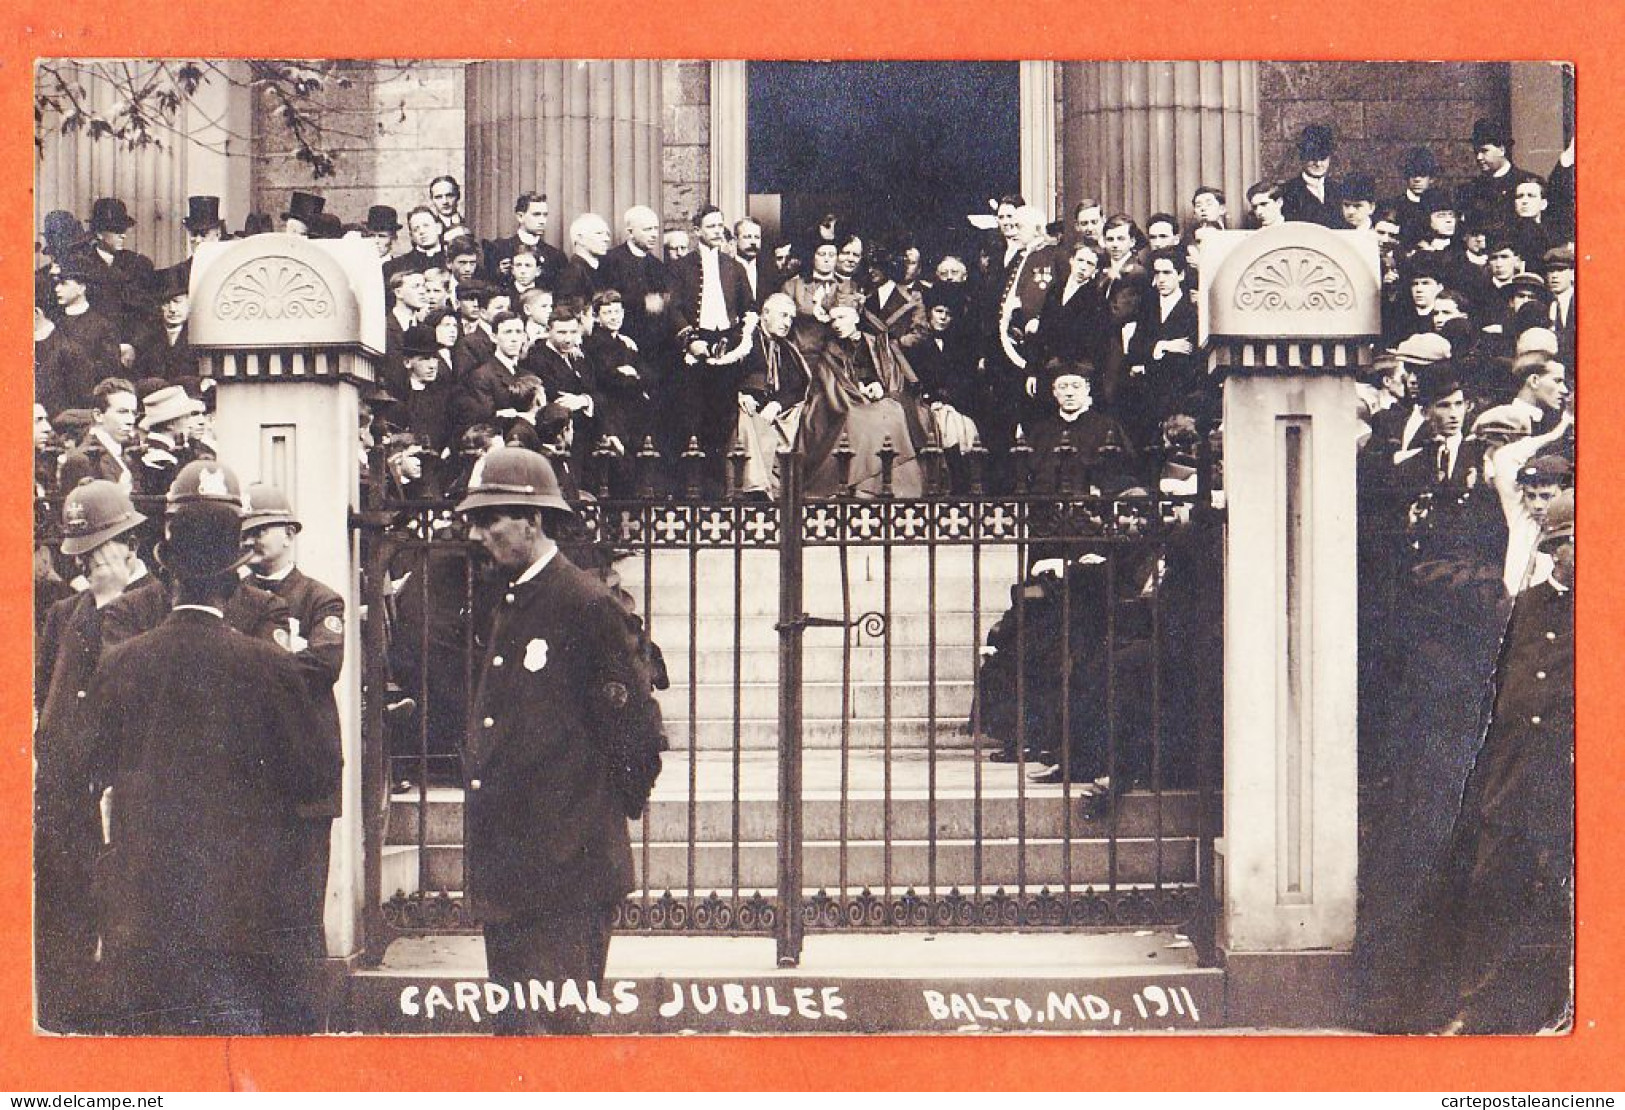 2308 / ⭐ Rare Carte-Photo BALTIMORE M-D Maryland CARDINALS Jubilee 1911 Real-Photography - Baltimore